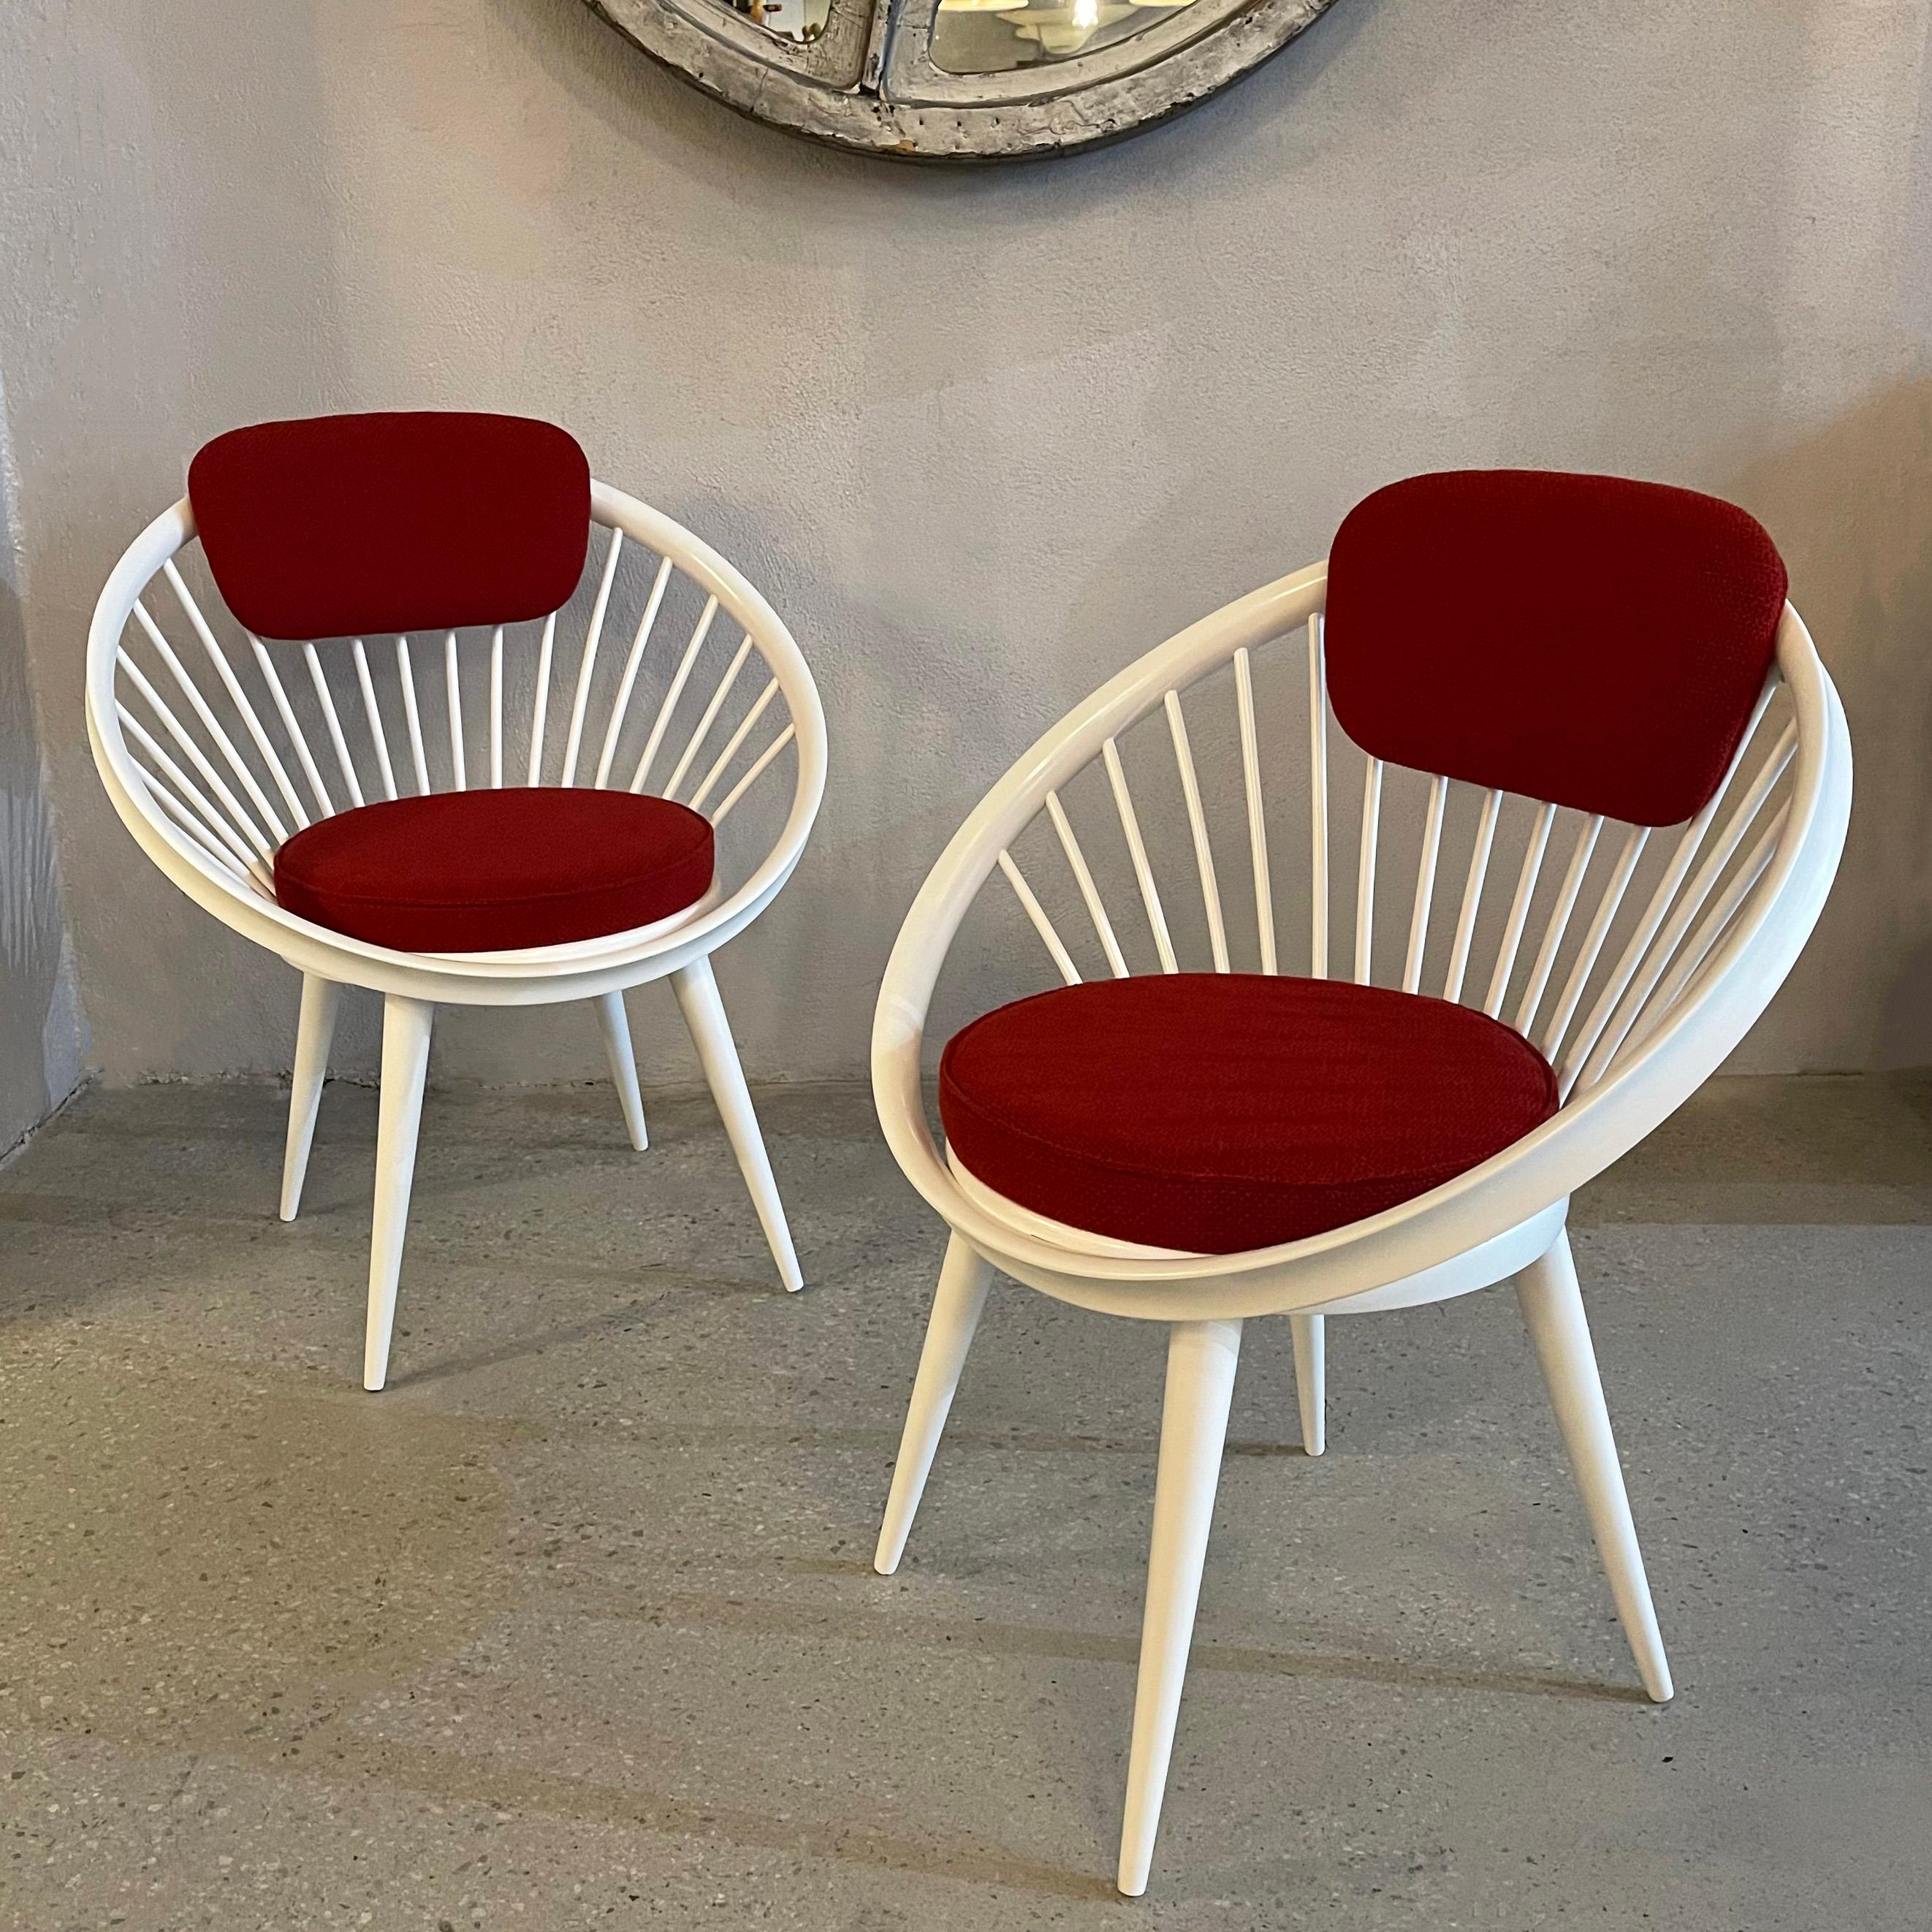 Pair of Scandinavian modern, circle lounge chairs by Yngve Ekström for Swedese, Sweden feature white lacquered, circular hoop, beech wood frames with spindle backs and upholstered seats and backrests in contrasting burgundy wool blend. The pair are